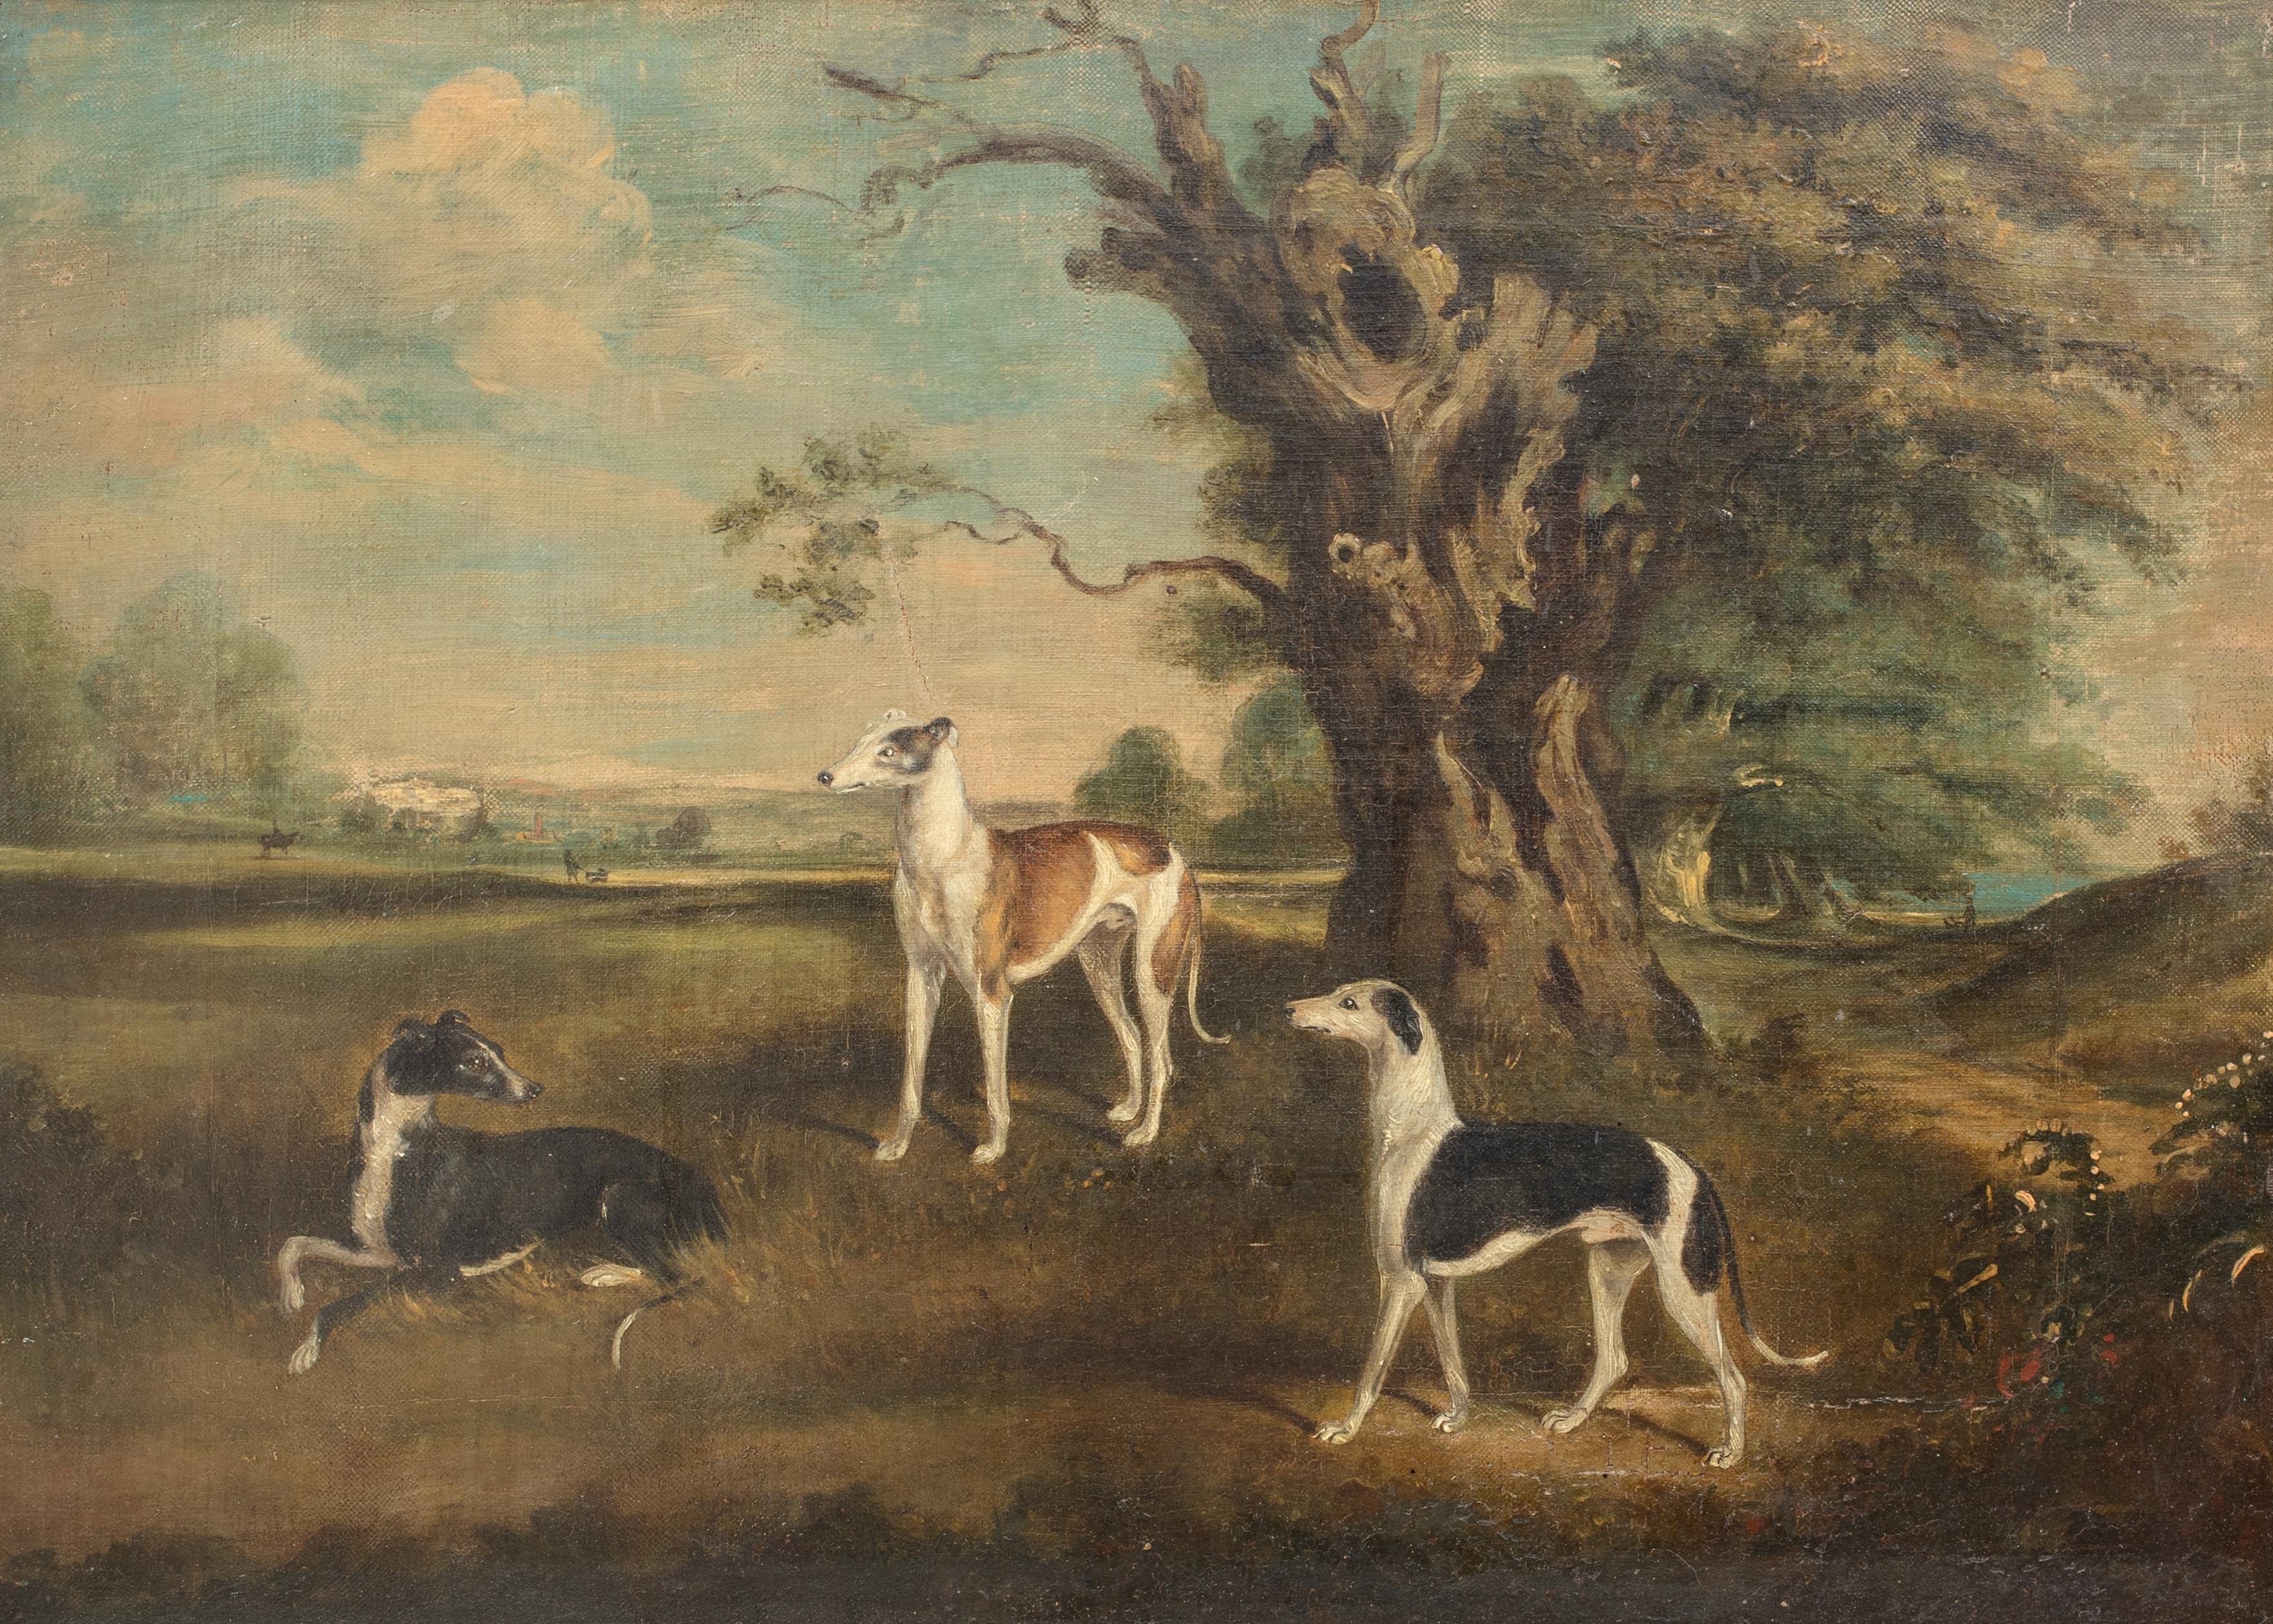 The Favourites Of The Earl Of Orford, Three Greyhounds In A Landscape, 18th Century

attributed to George GARRARD (1760-1826) 

Large 18th Century portrait of three greyhounds in a landscape, the favourites of the Earl Of Orford, oil on canvas